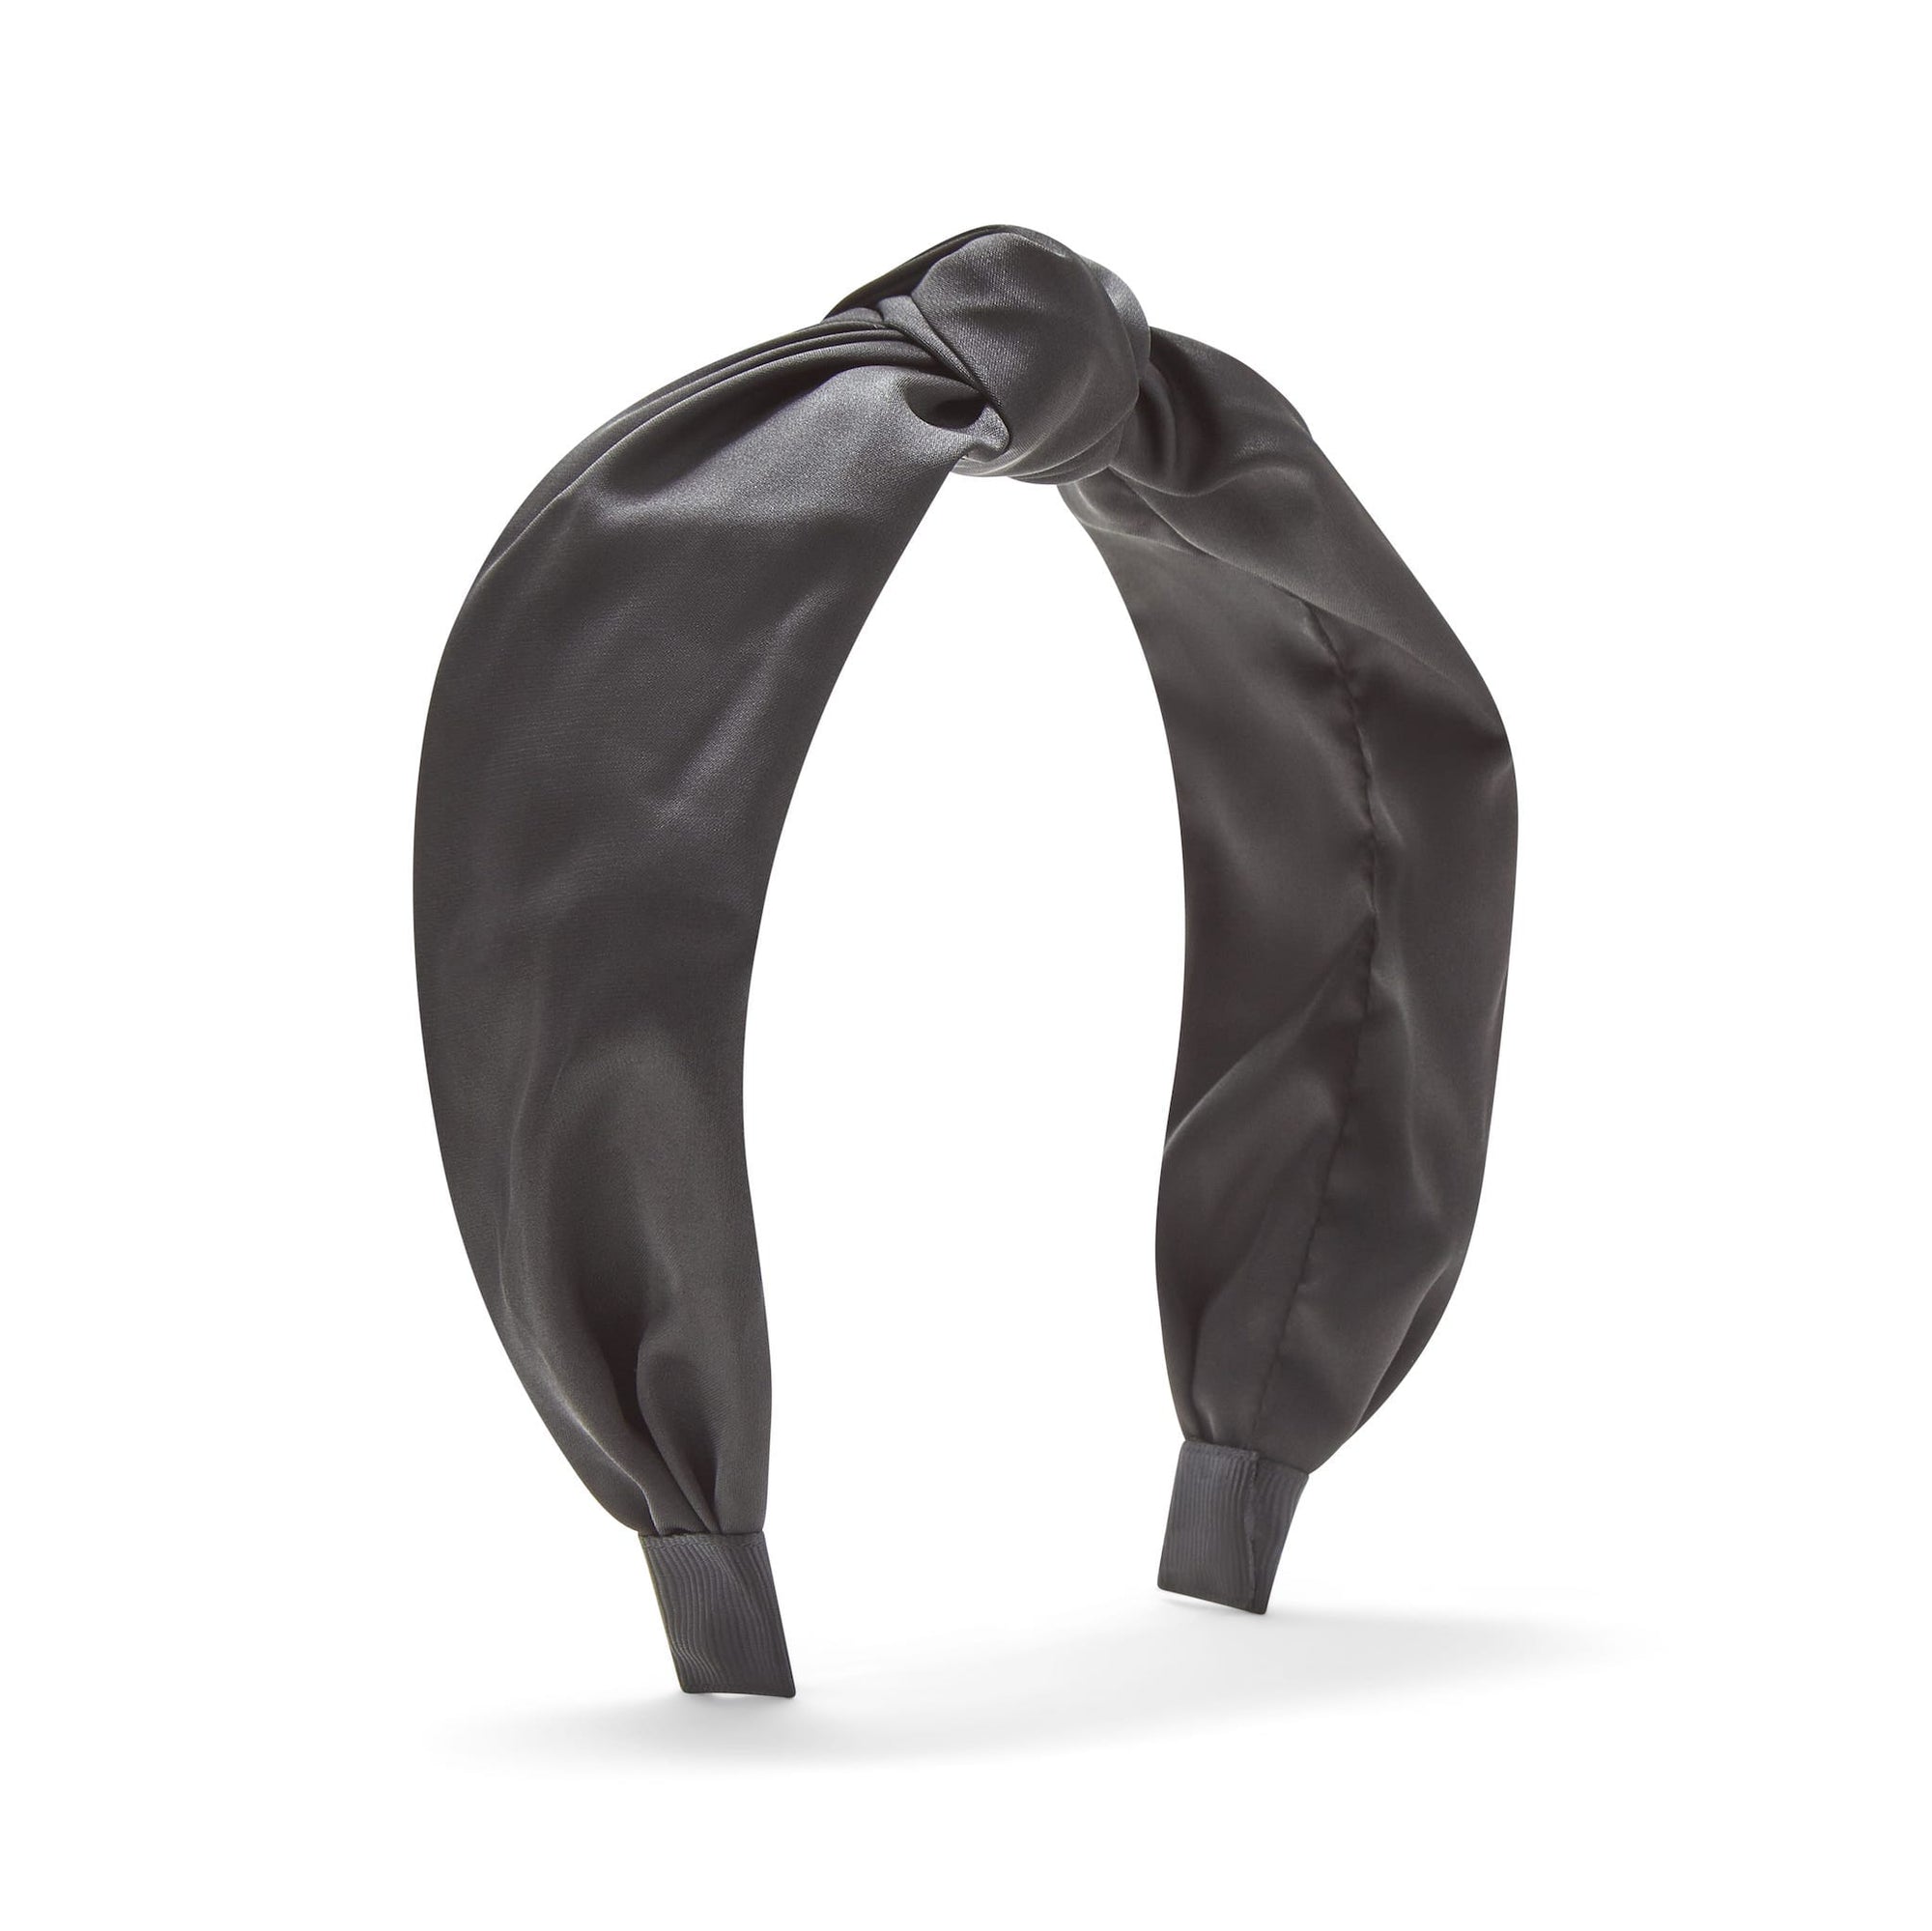 Only Curls Satin Knot Headband - Black - Only Curls